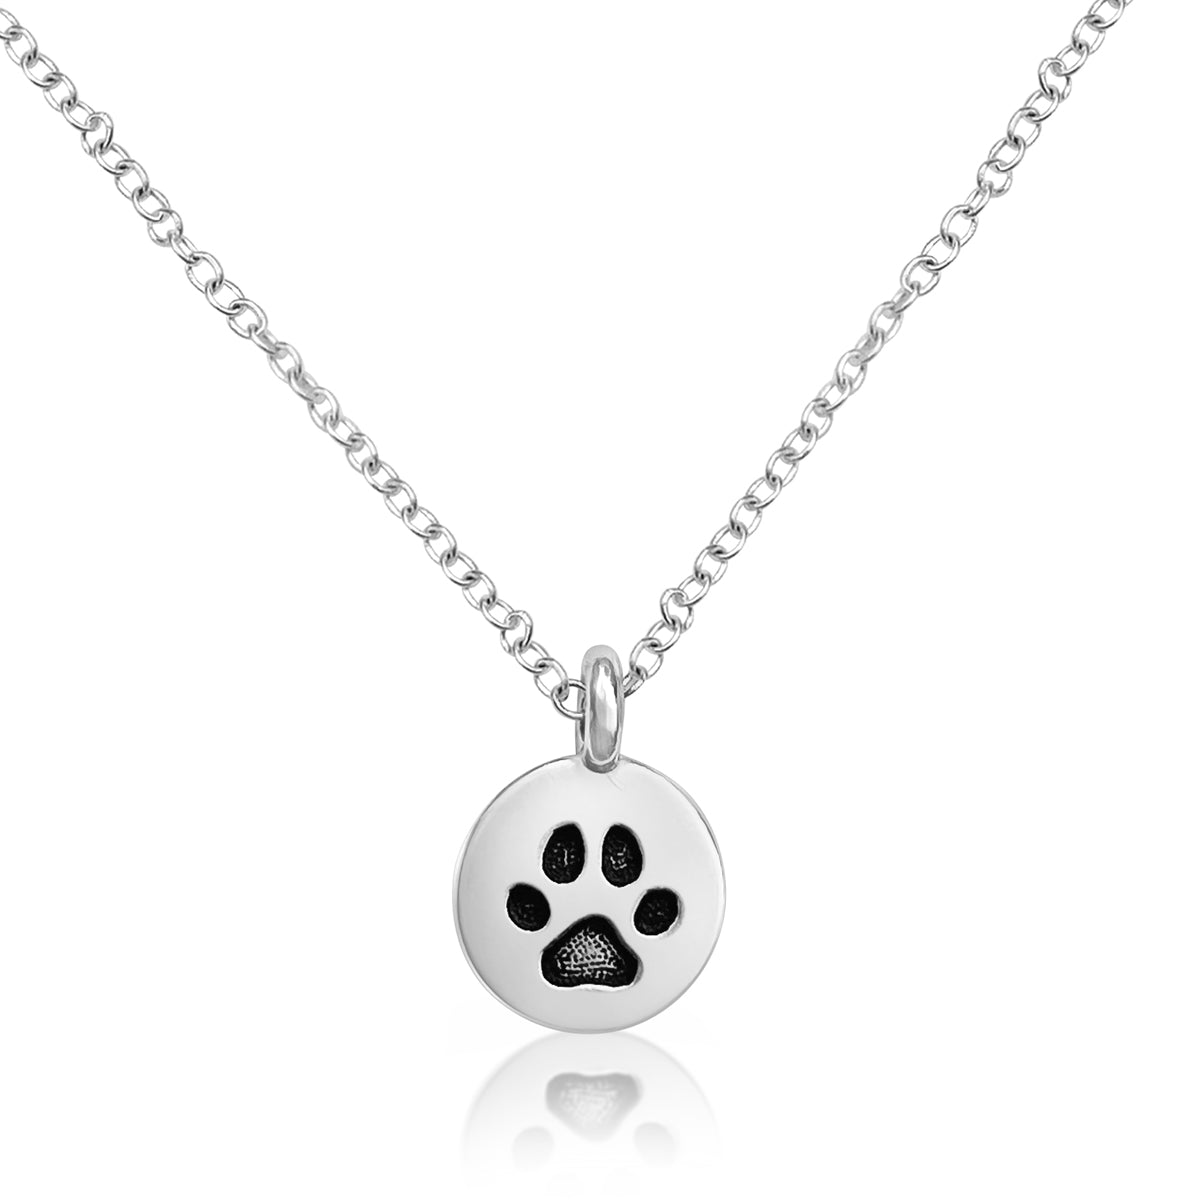 Paw Print Charm Necklace to Celebrate Unconditional Love